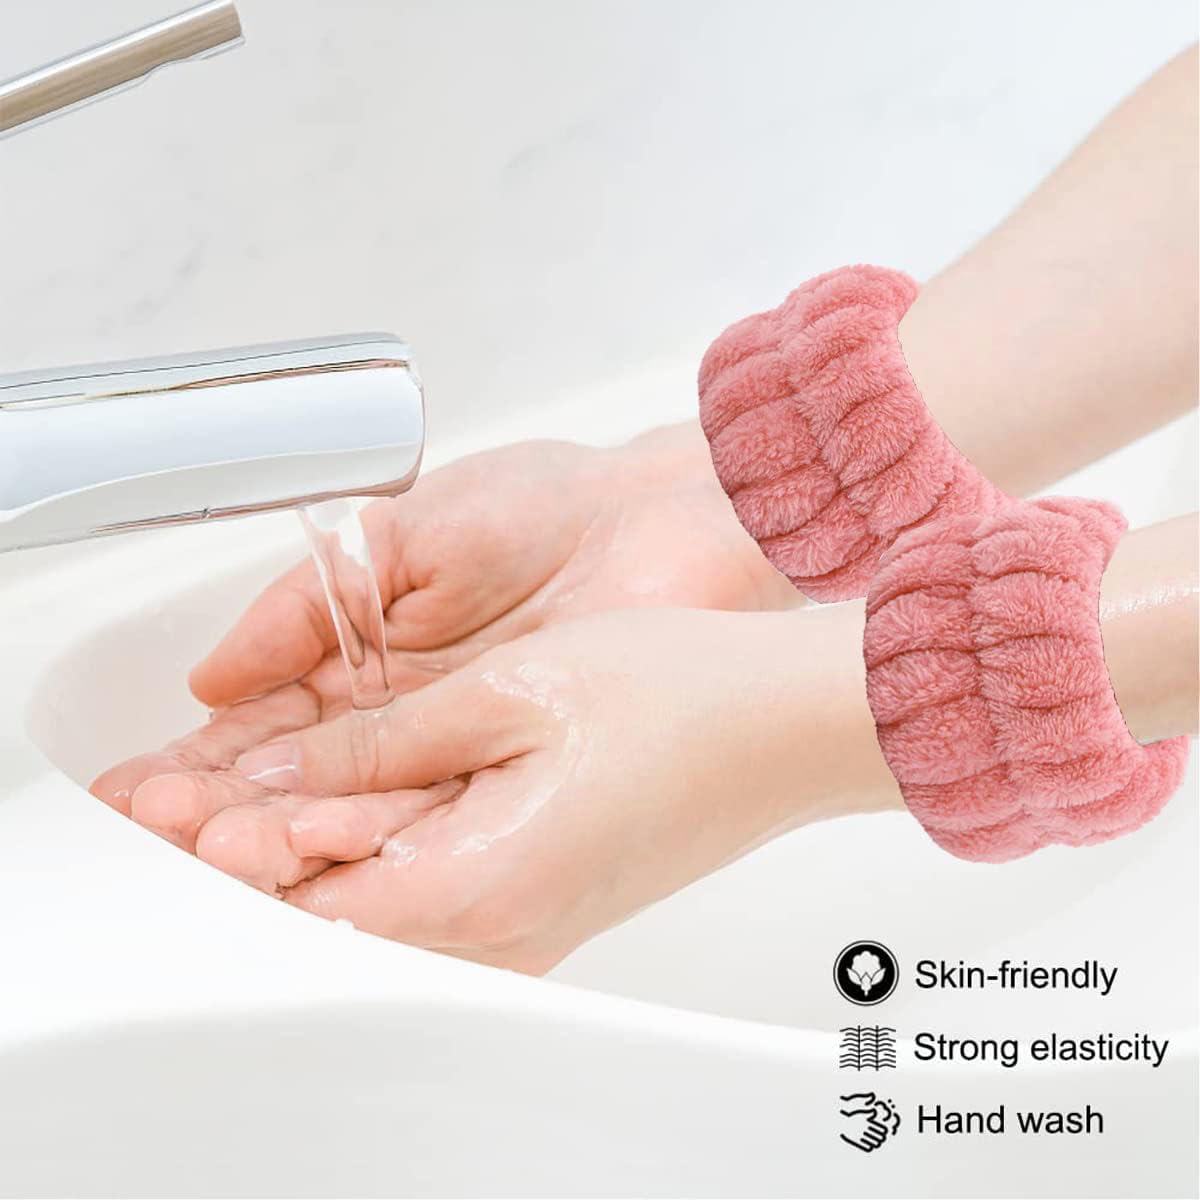 LAPOHI 4 PCS Spa Headband Wrist Washband Scrunchies Cuffs for Washing Face, Towel Wristbands Hair band for Women Girls Makeup Prevent Liquids from Spilling Down Your Arms